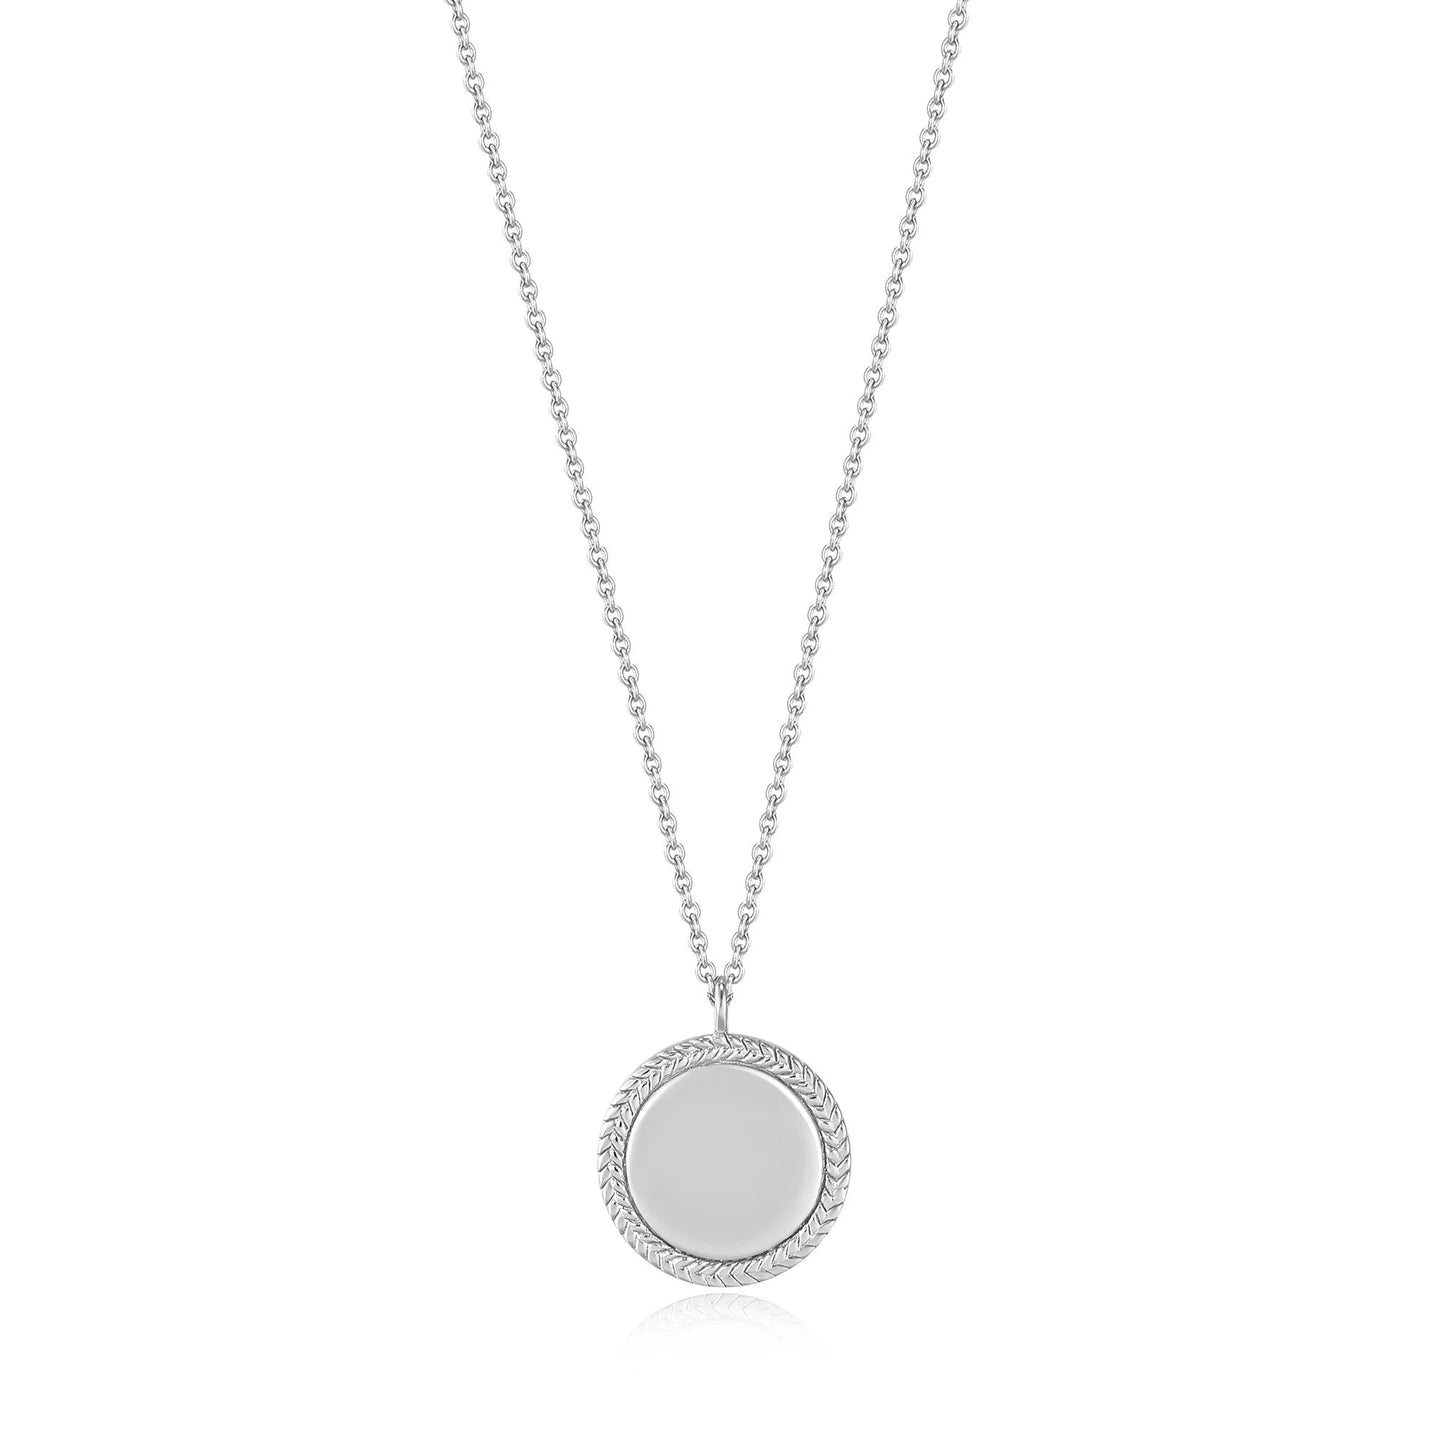 Ropes & Dreams Silver Rope Disc Necklace